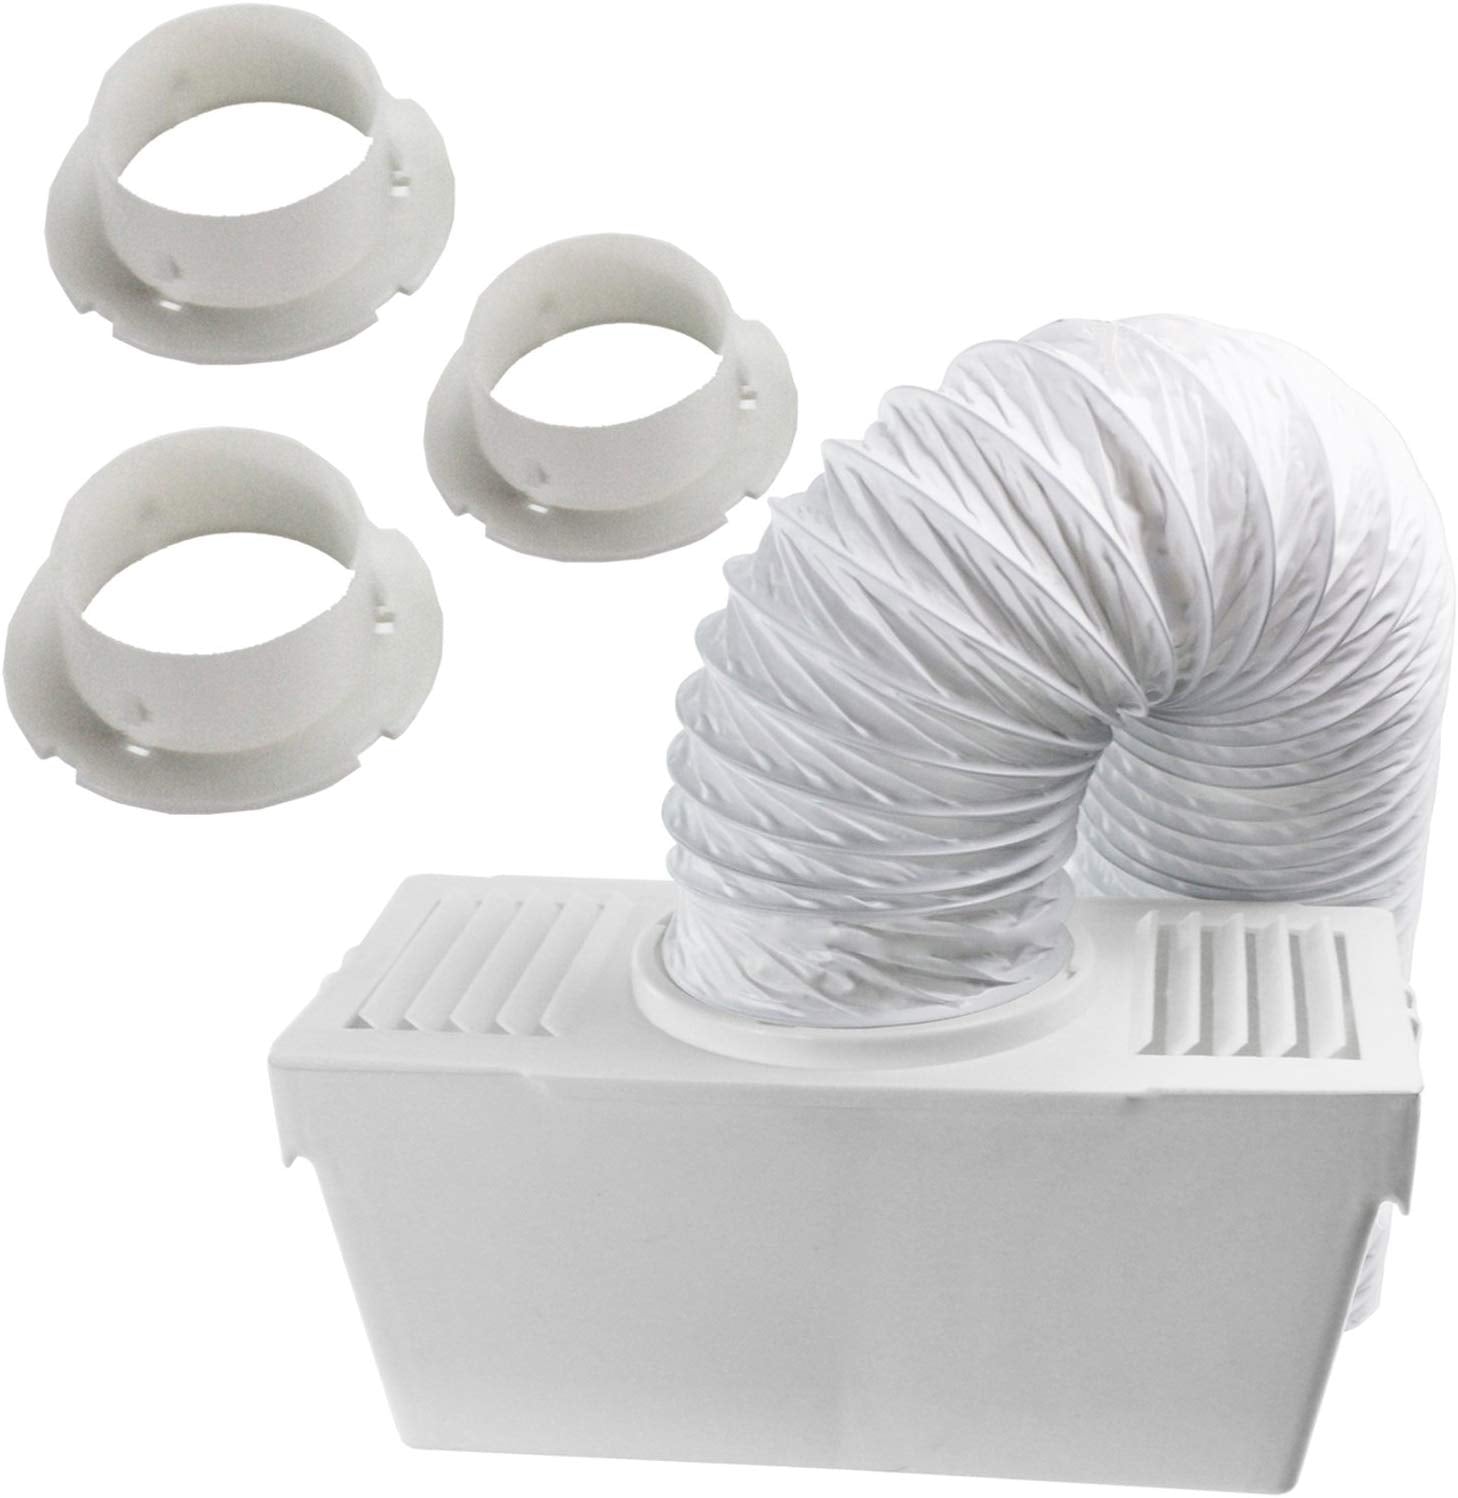 Vent Hose Condenser Kit with 3 x Adapters for Miele Tumble Dryer (1.2m)